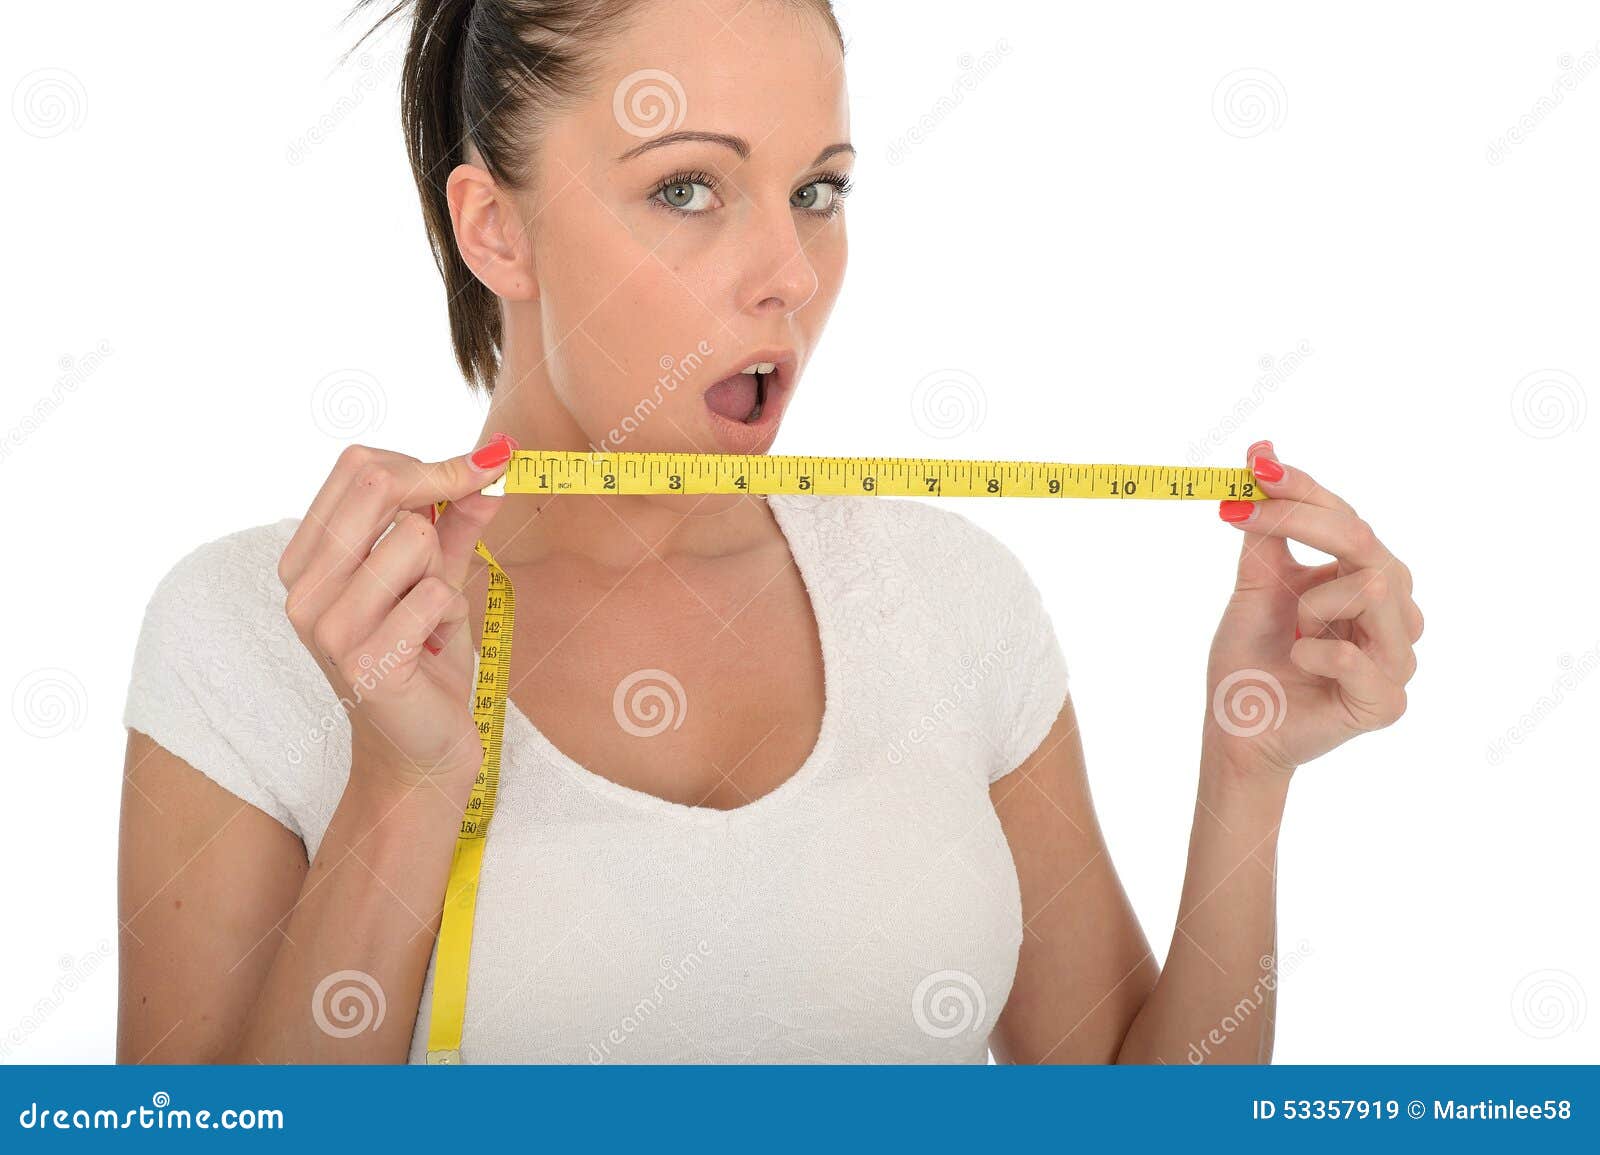 https://thumbs.dreamstime.com/z/healthy-young-woman-holding-yellow-tape-measure-dslr-royalty-free-image-attractive-stretched-out-measuring-both-hands-53357919.jpg